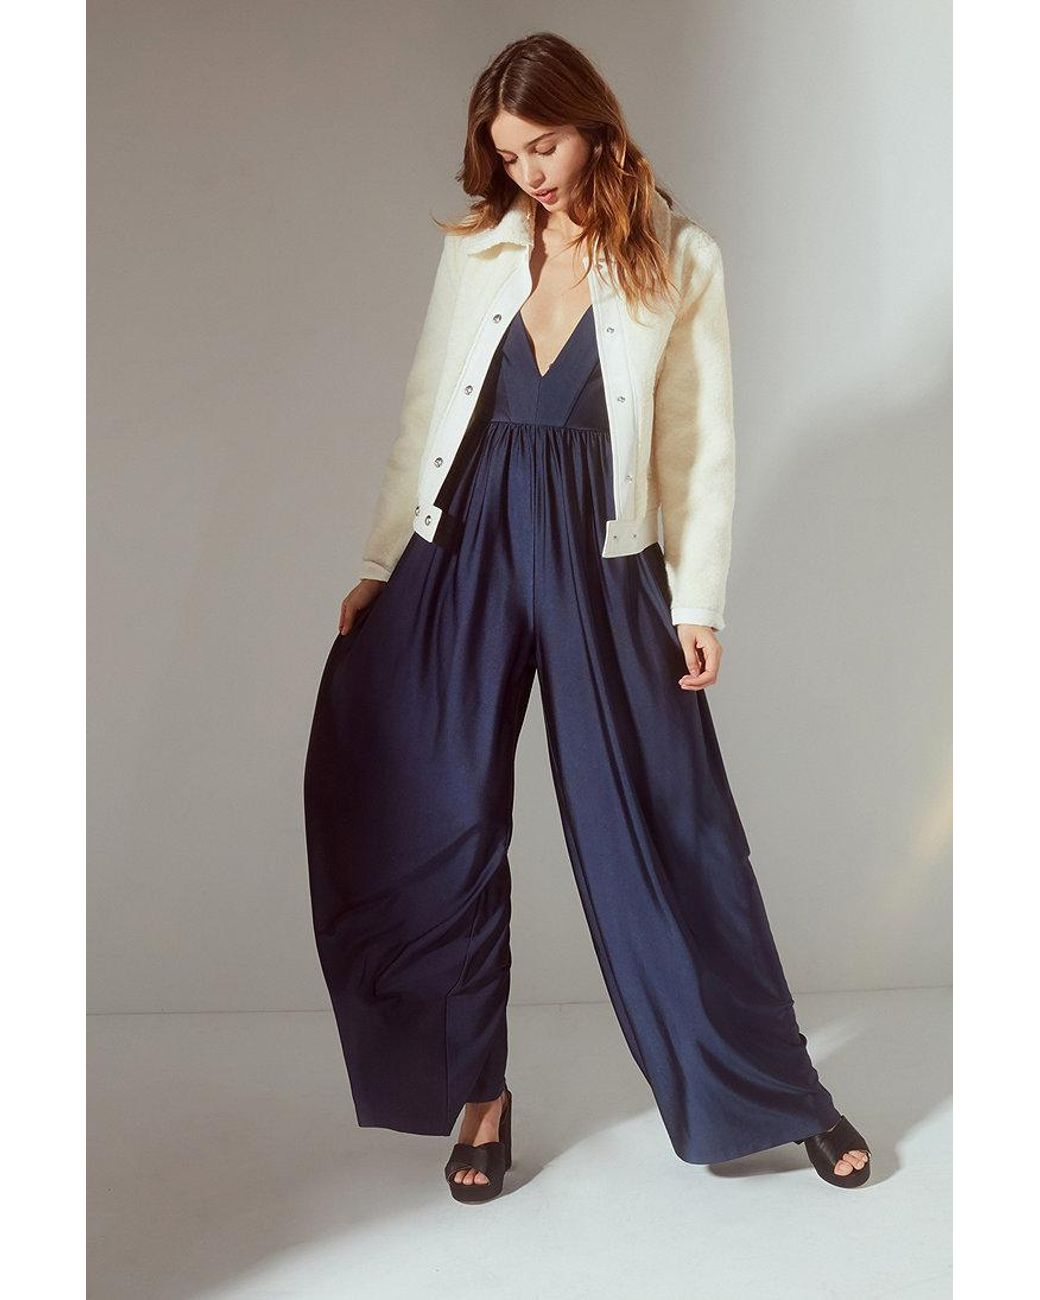 Urban Outfitters Uo Gia Plunging Shimmer Jumpsuit in Navy (Blue) | Lyst UK